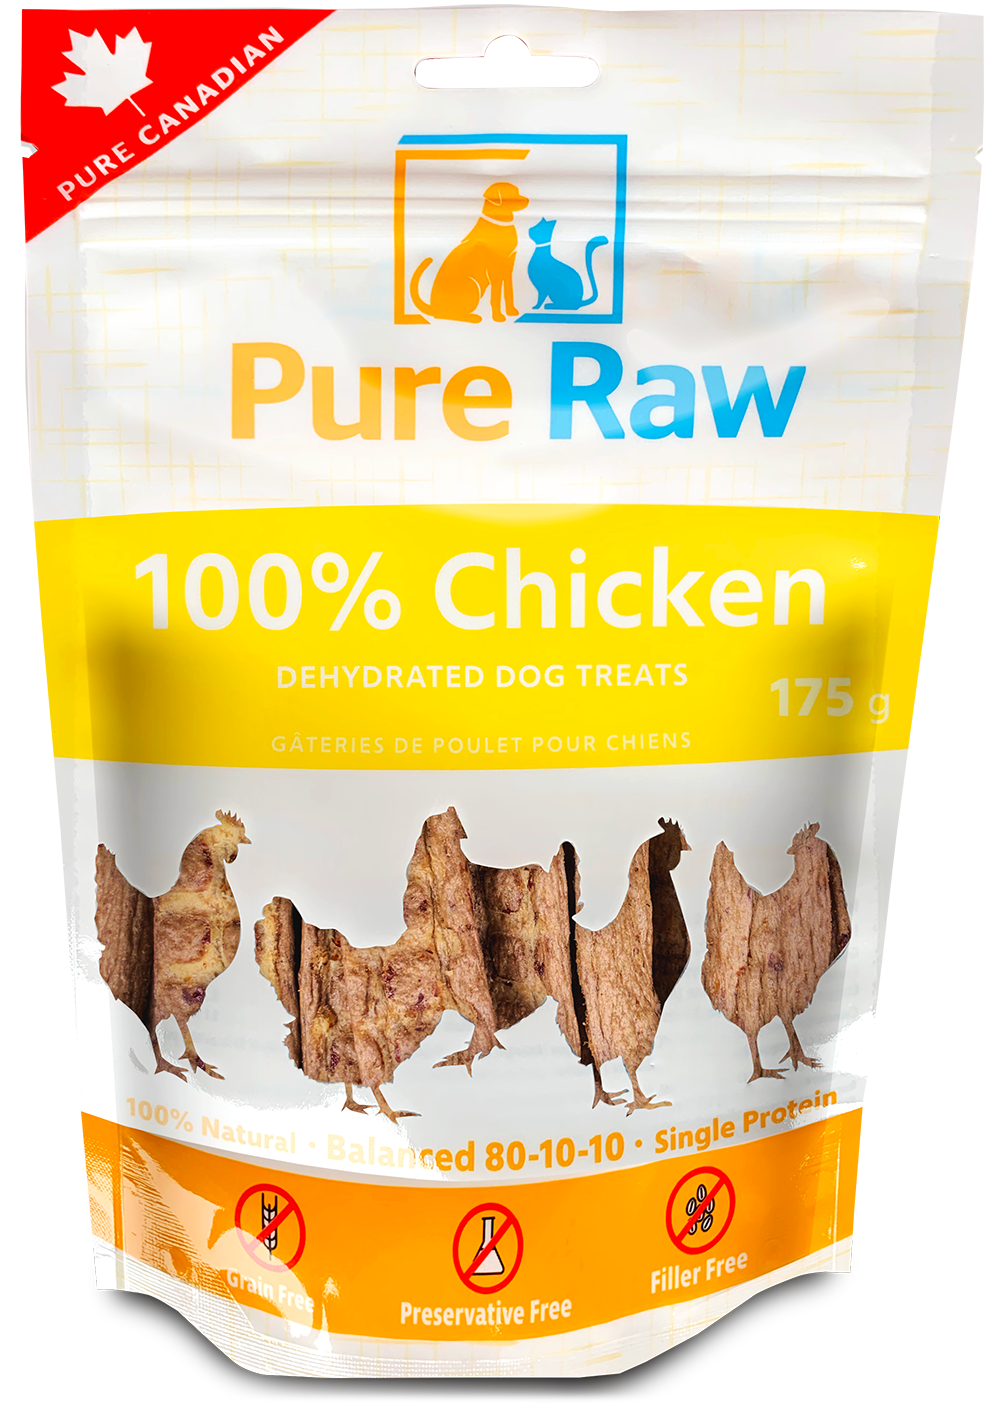 Dehydrated Dog Treats - Chicken - Front